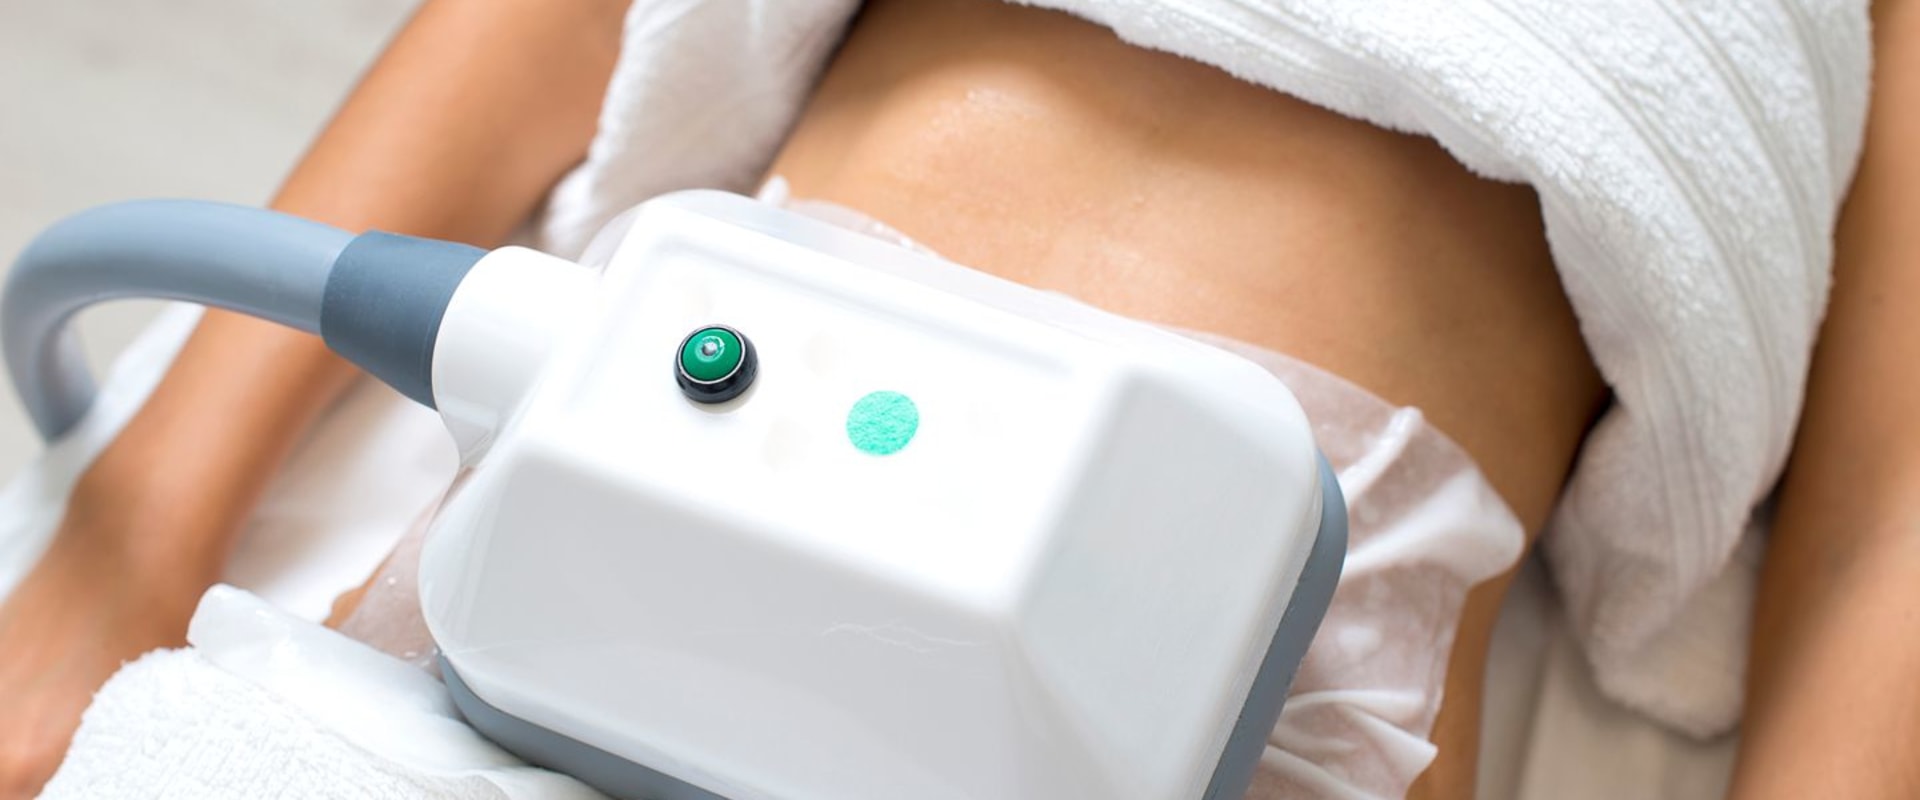 Are Non-Surgical Fat Reduction Treatments Safe?